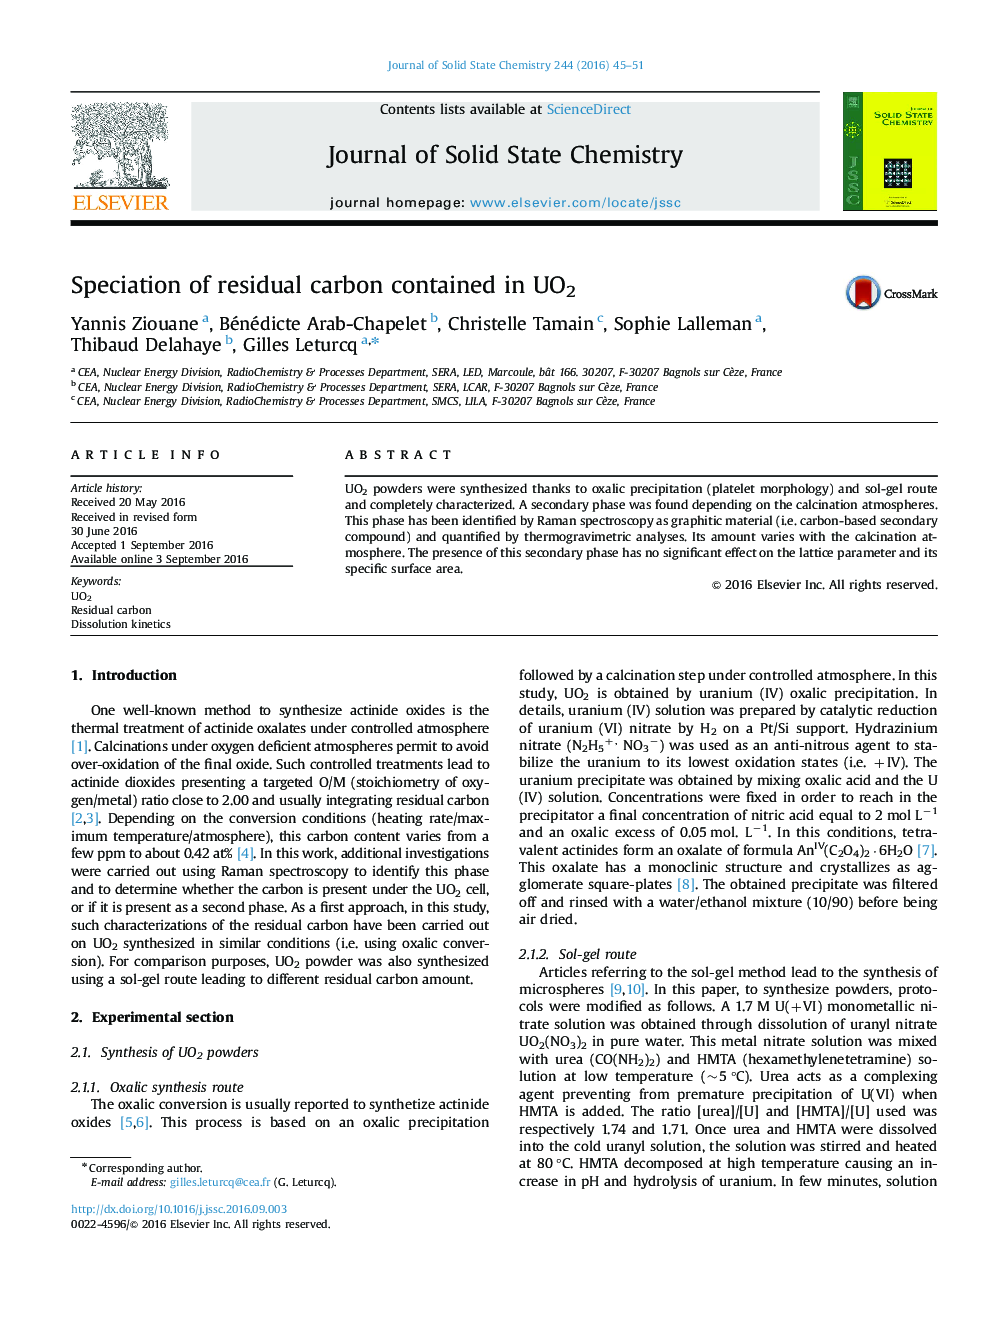 Speciation of residual carbon contained in UO2